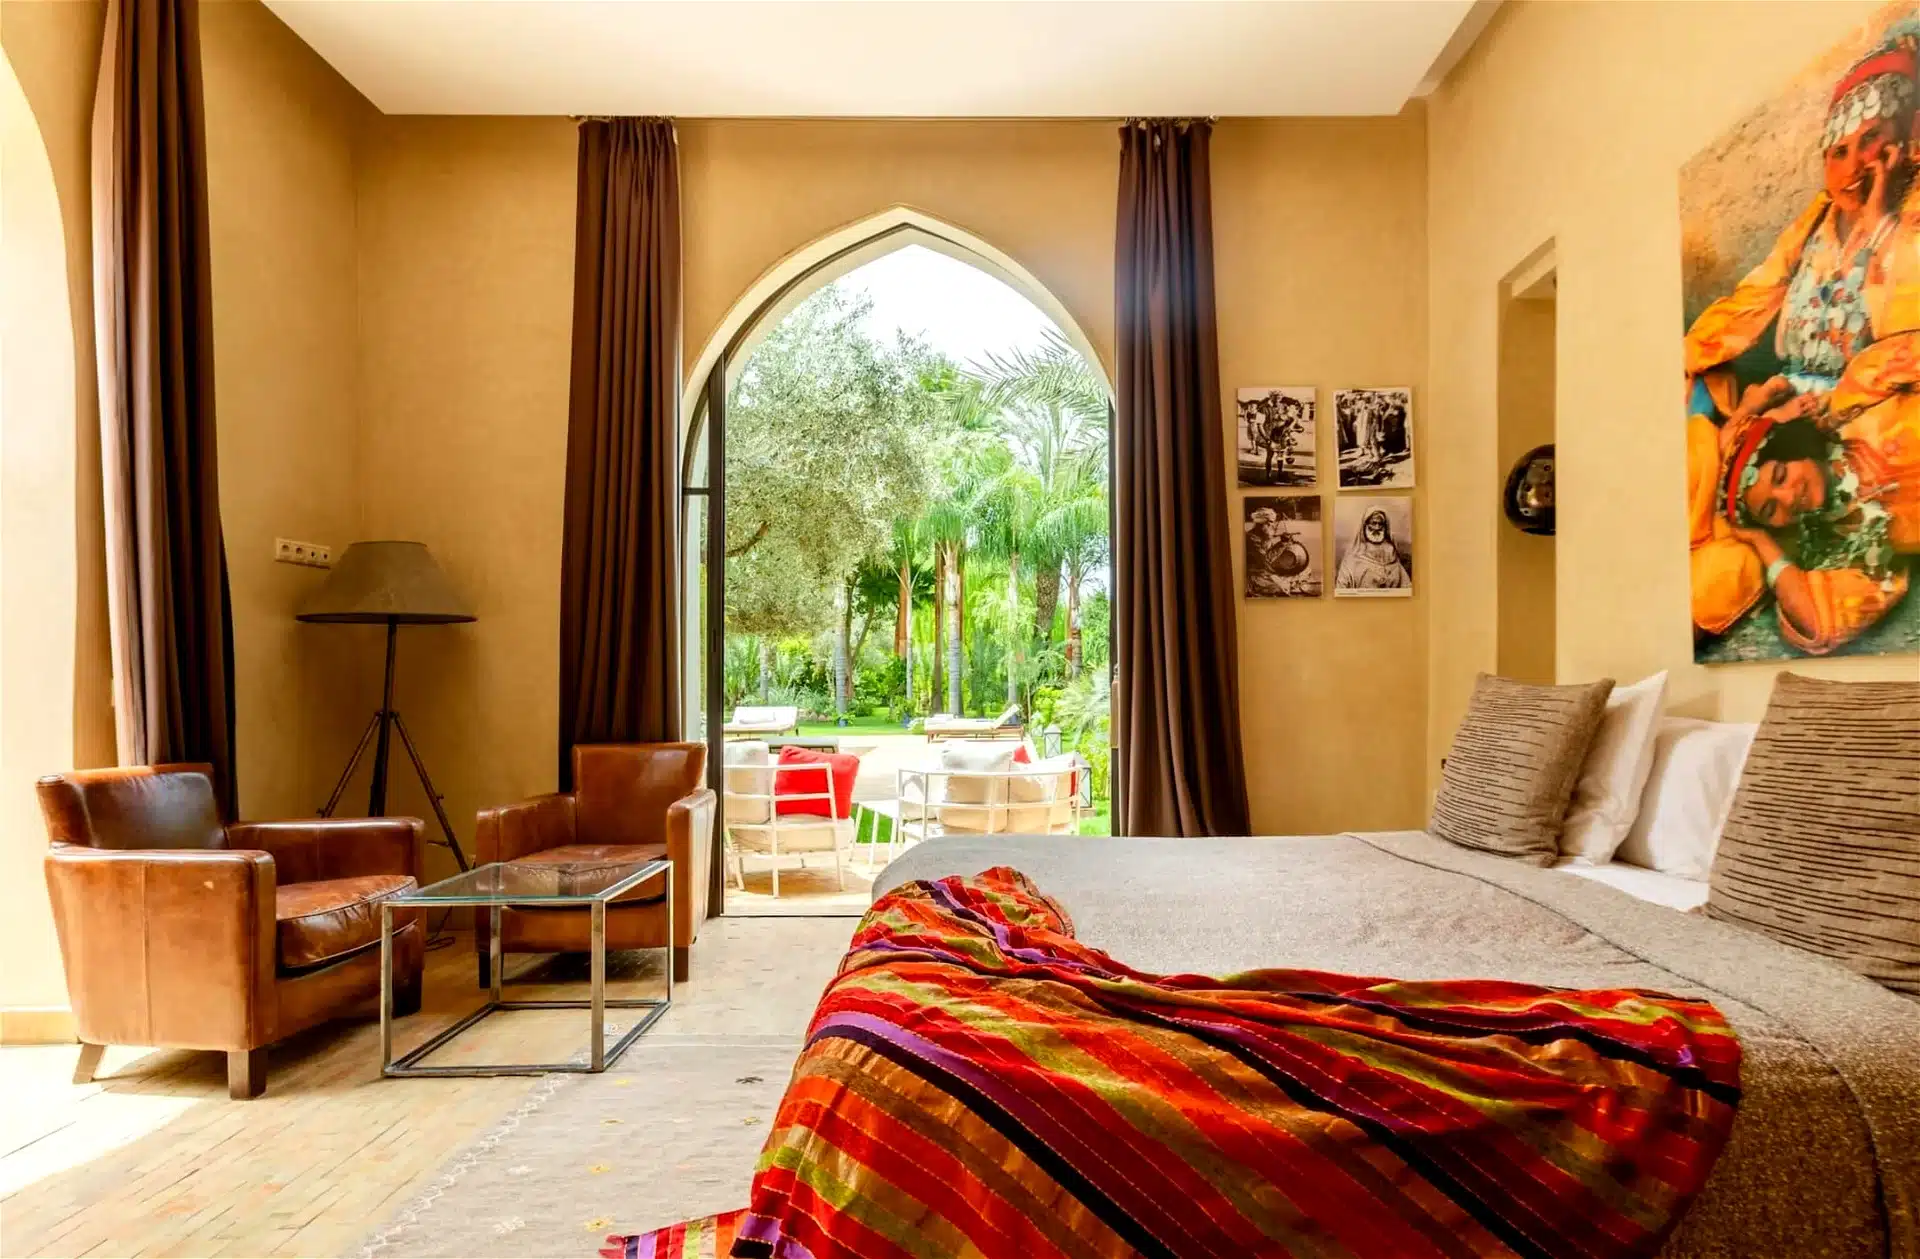 Luxury bedroom at Marrakesh Villa, fundraiser auction items, live auction items